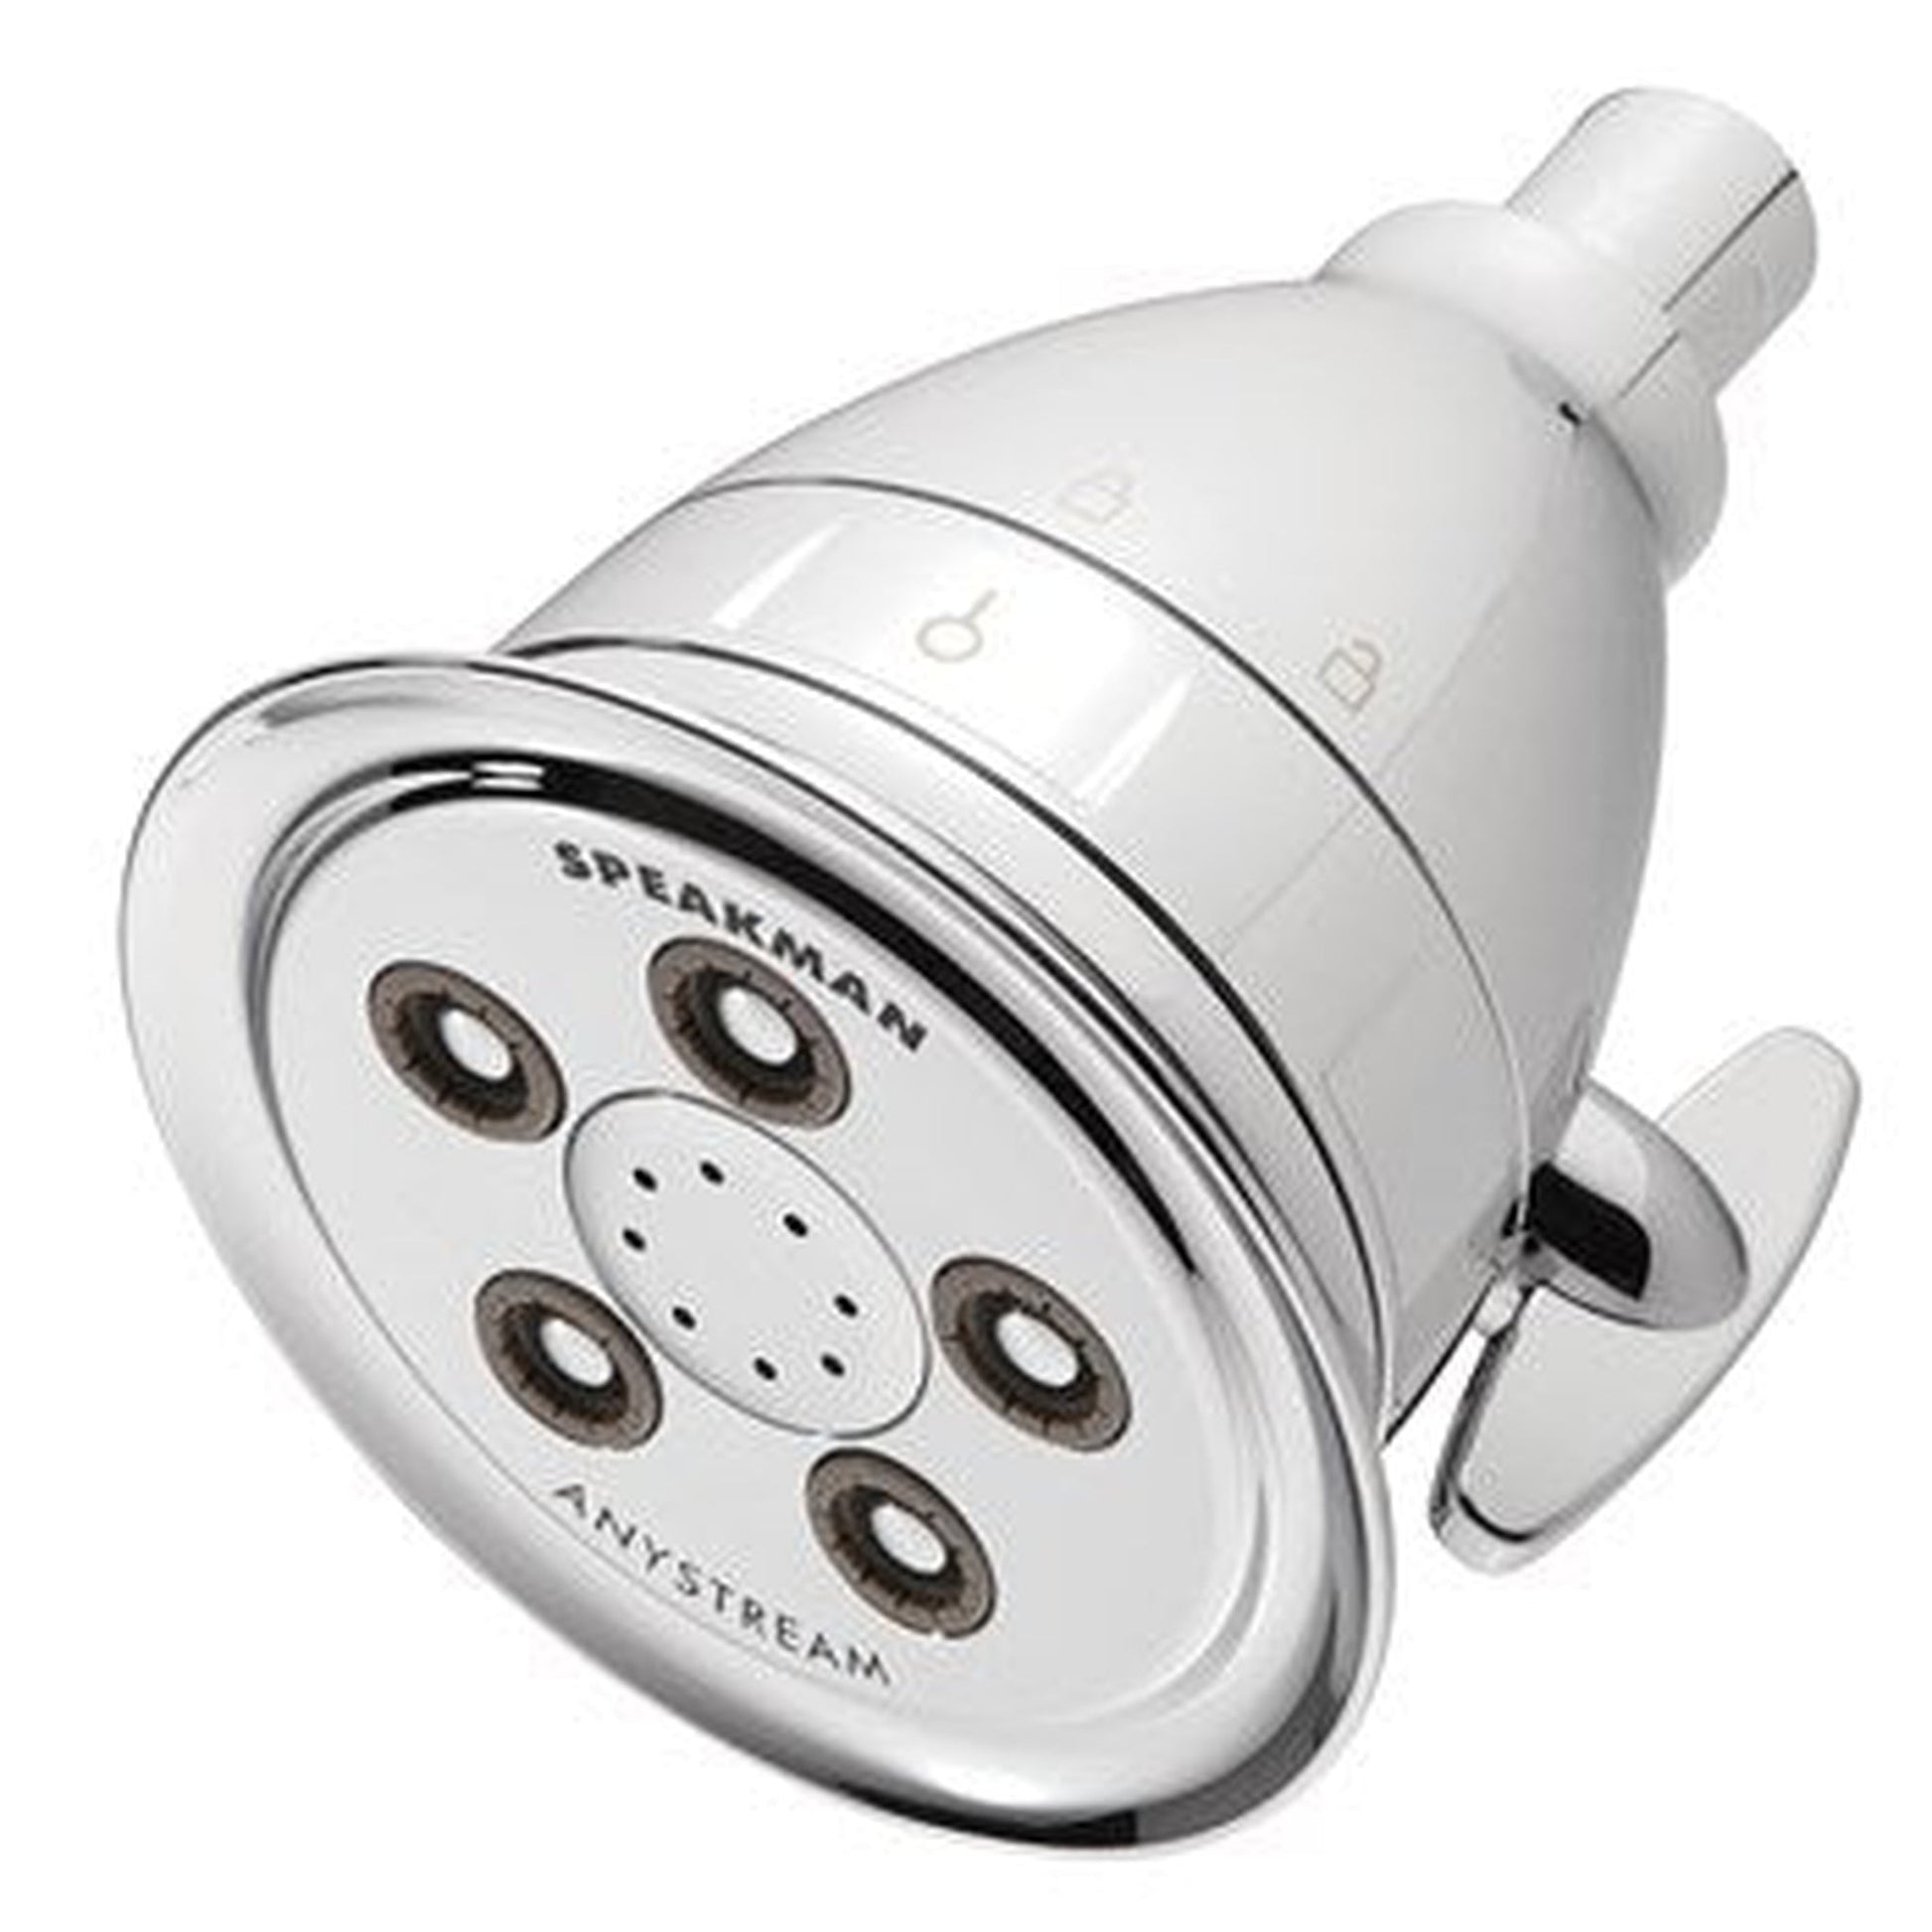 Speakman Hotel Pure 2.0 GPM 5-Plunger Patented Anystream Polished Chrome Shower Head With Internal Filtering Cartridge